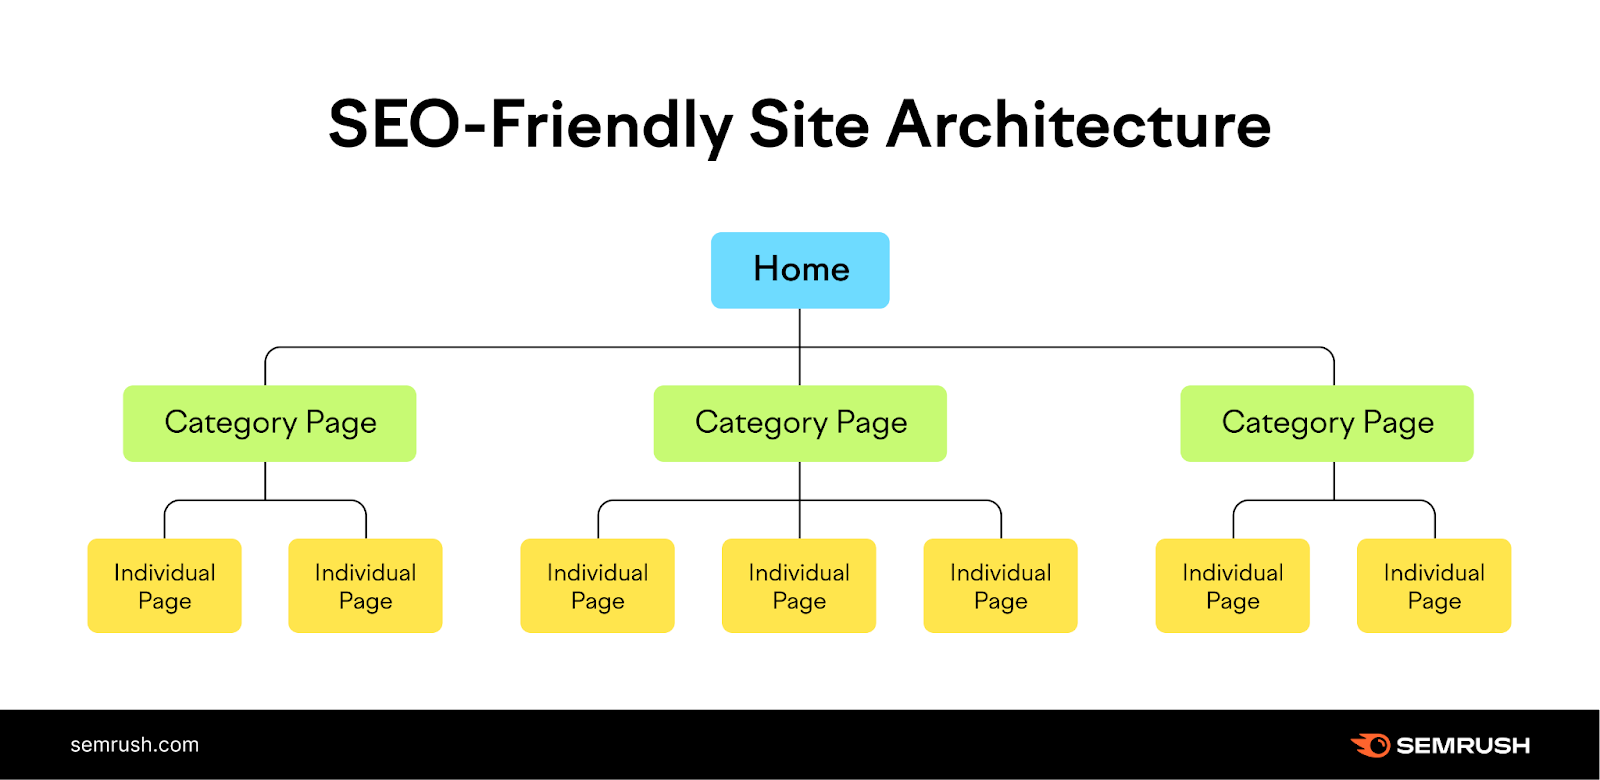 "SEO-friendly tract  architecture" infographic